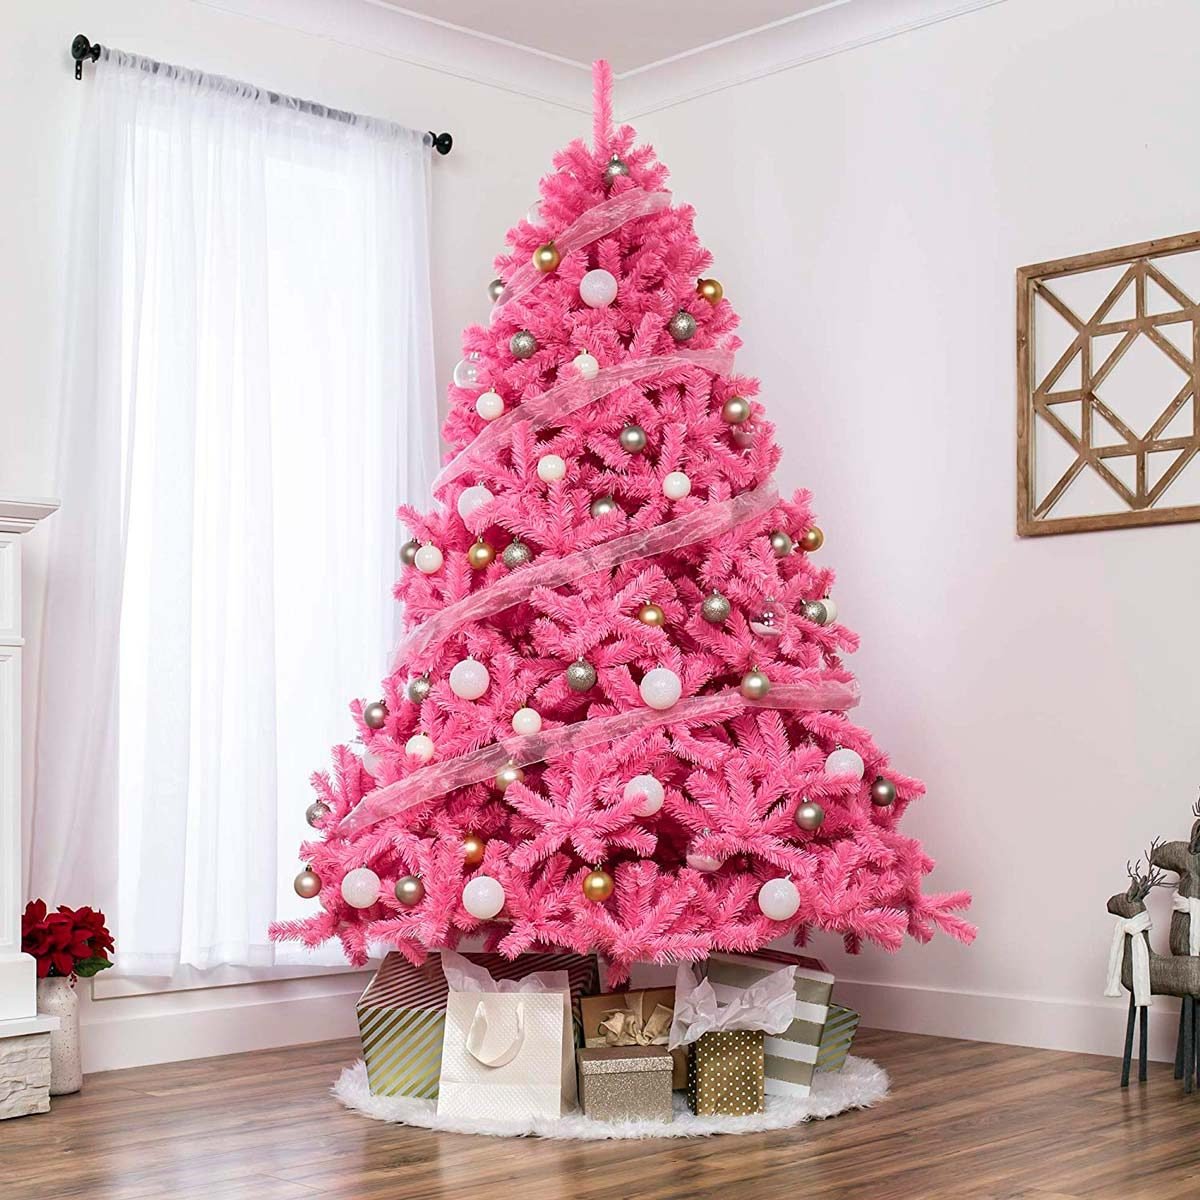 9 Pink Christmas Trees That'll Make You Rethink Holiday Traditions